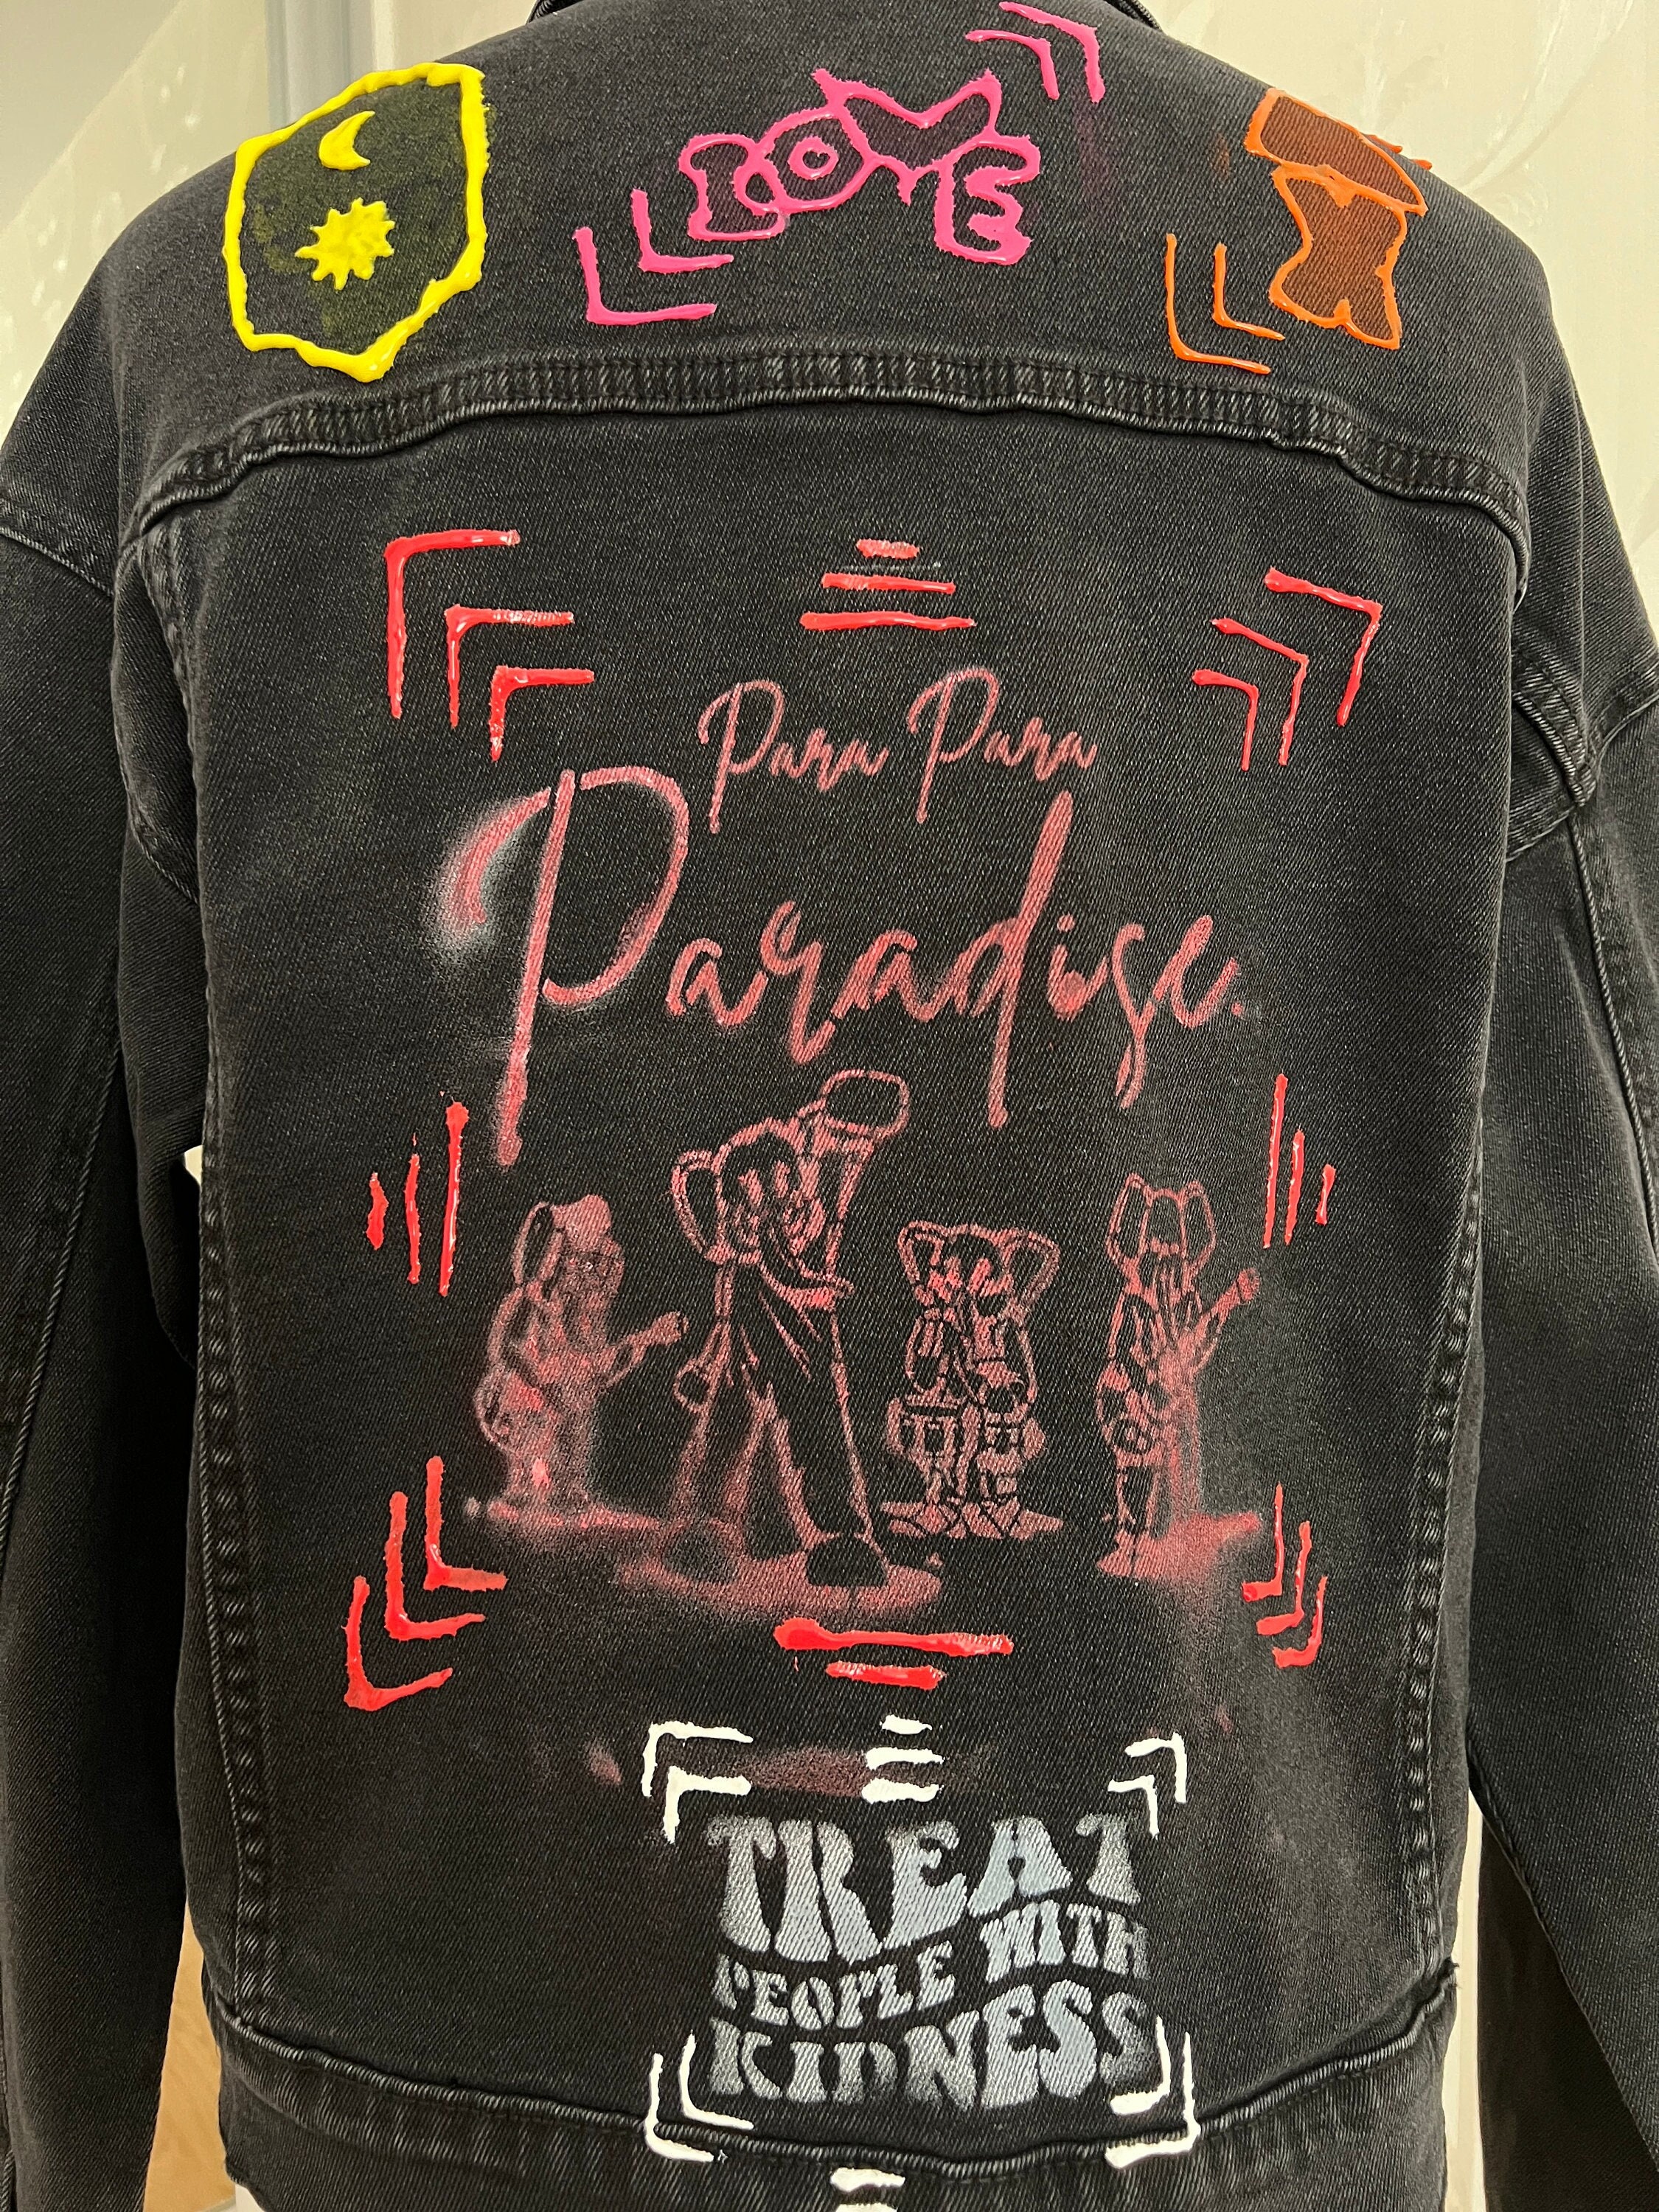 Coldplay Inspired Jacket / Handmade / Concert / Paradise / Tour 2023/24 